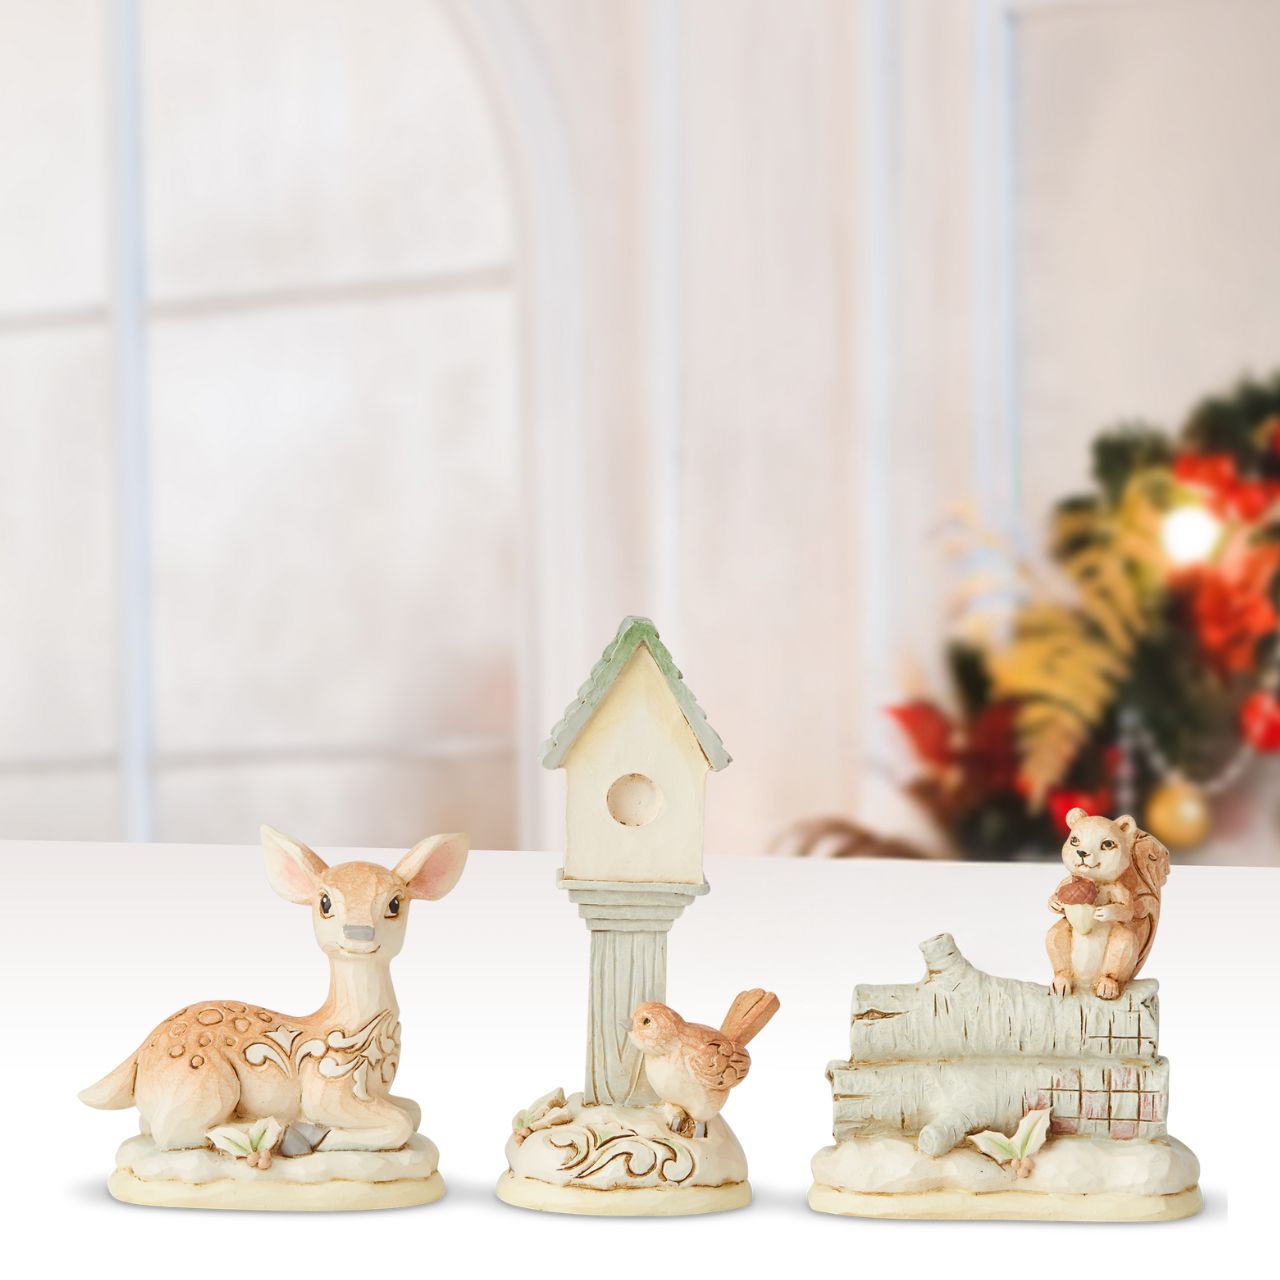 White Woodland Mini Accessory Set of 3  Beautifully decorated in delightful detail, this charming set of three White Woodland forest friends, a Bird with Bird House, a Deer and an adorable Squirrel, feature a wintry colour palette and Jim Shore's whimsical folk art design with holiday accents.